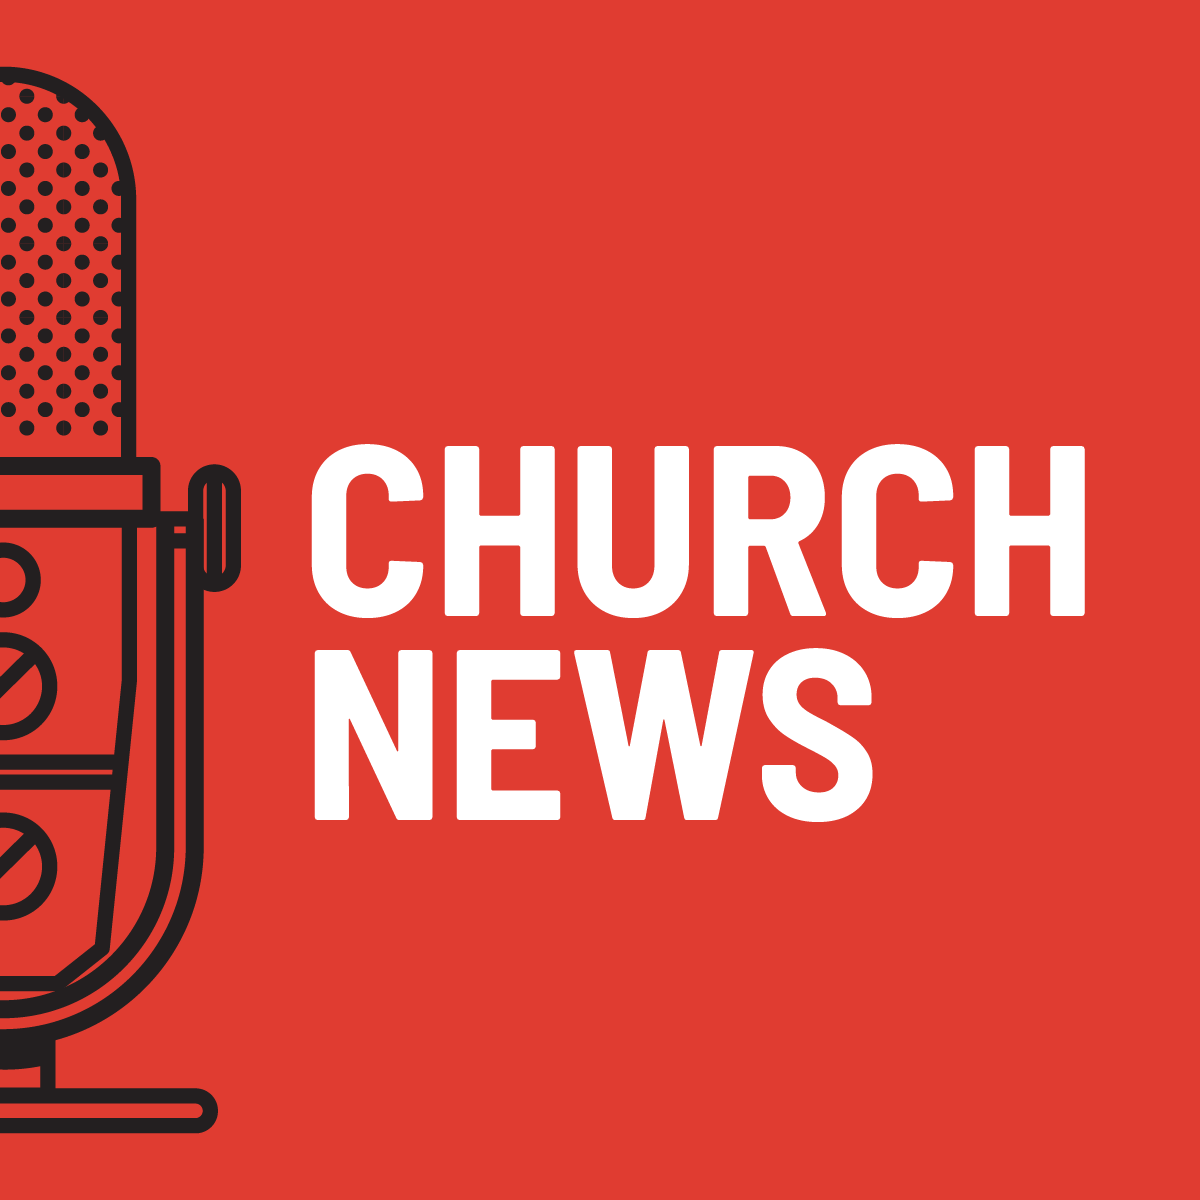 Mary Richards reports — from radio to Church News journalist